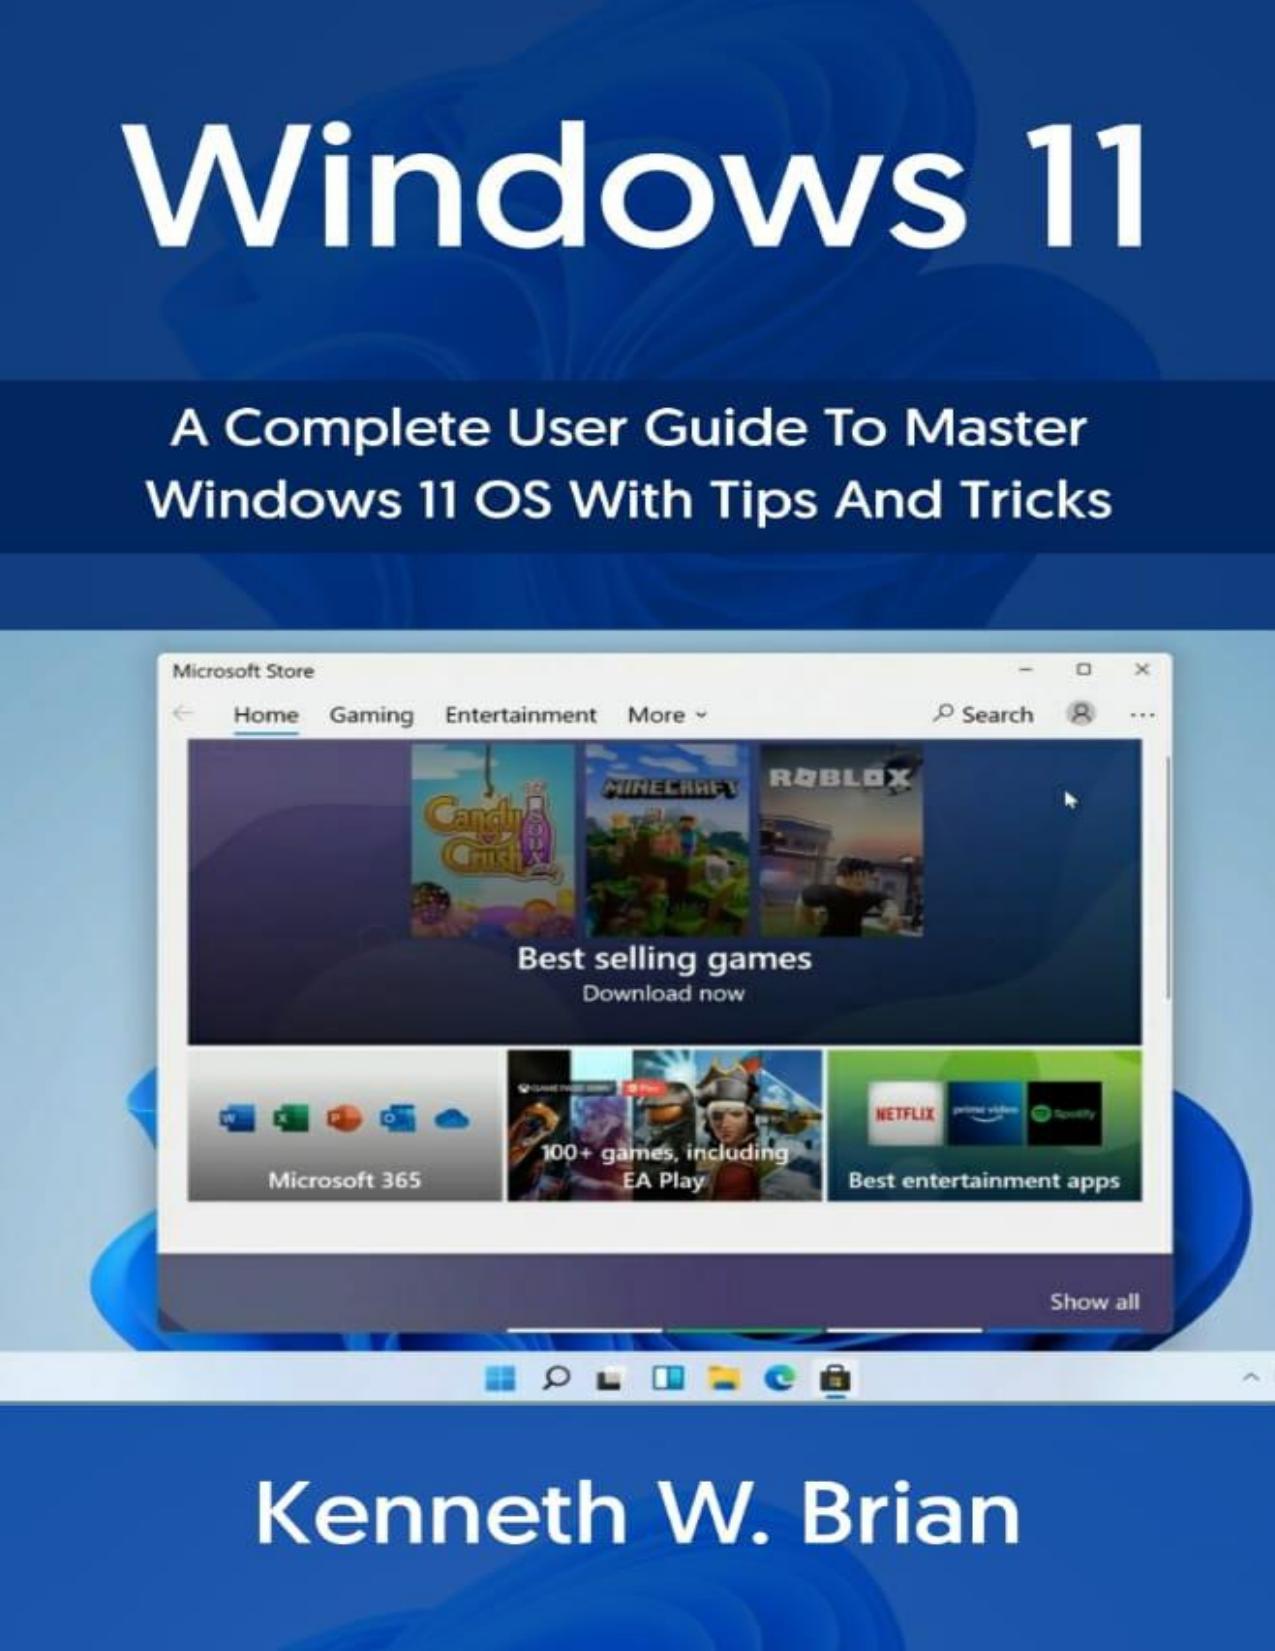 Windows 11: A Complete User Guide To Mater Windows 11 OS With Tips And Tricks by Kenneth W. Brian